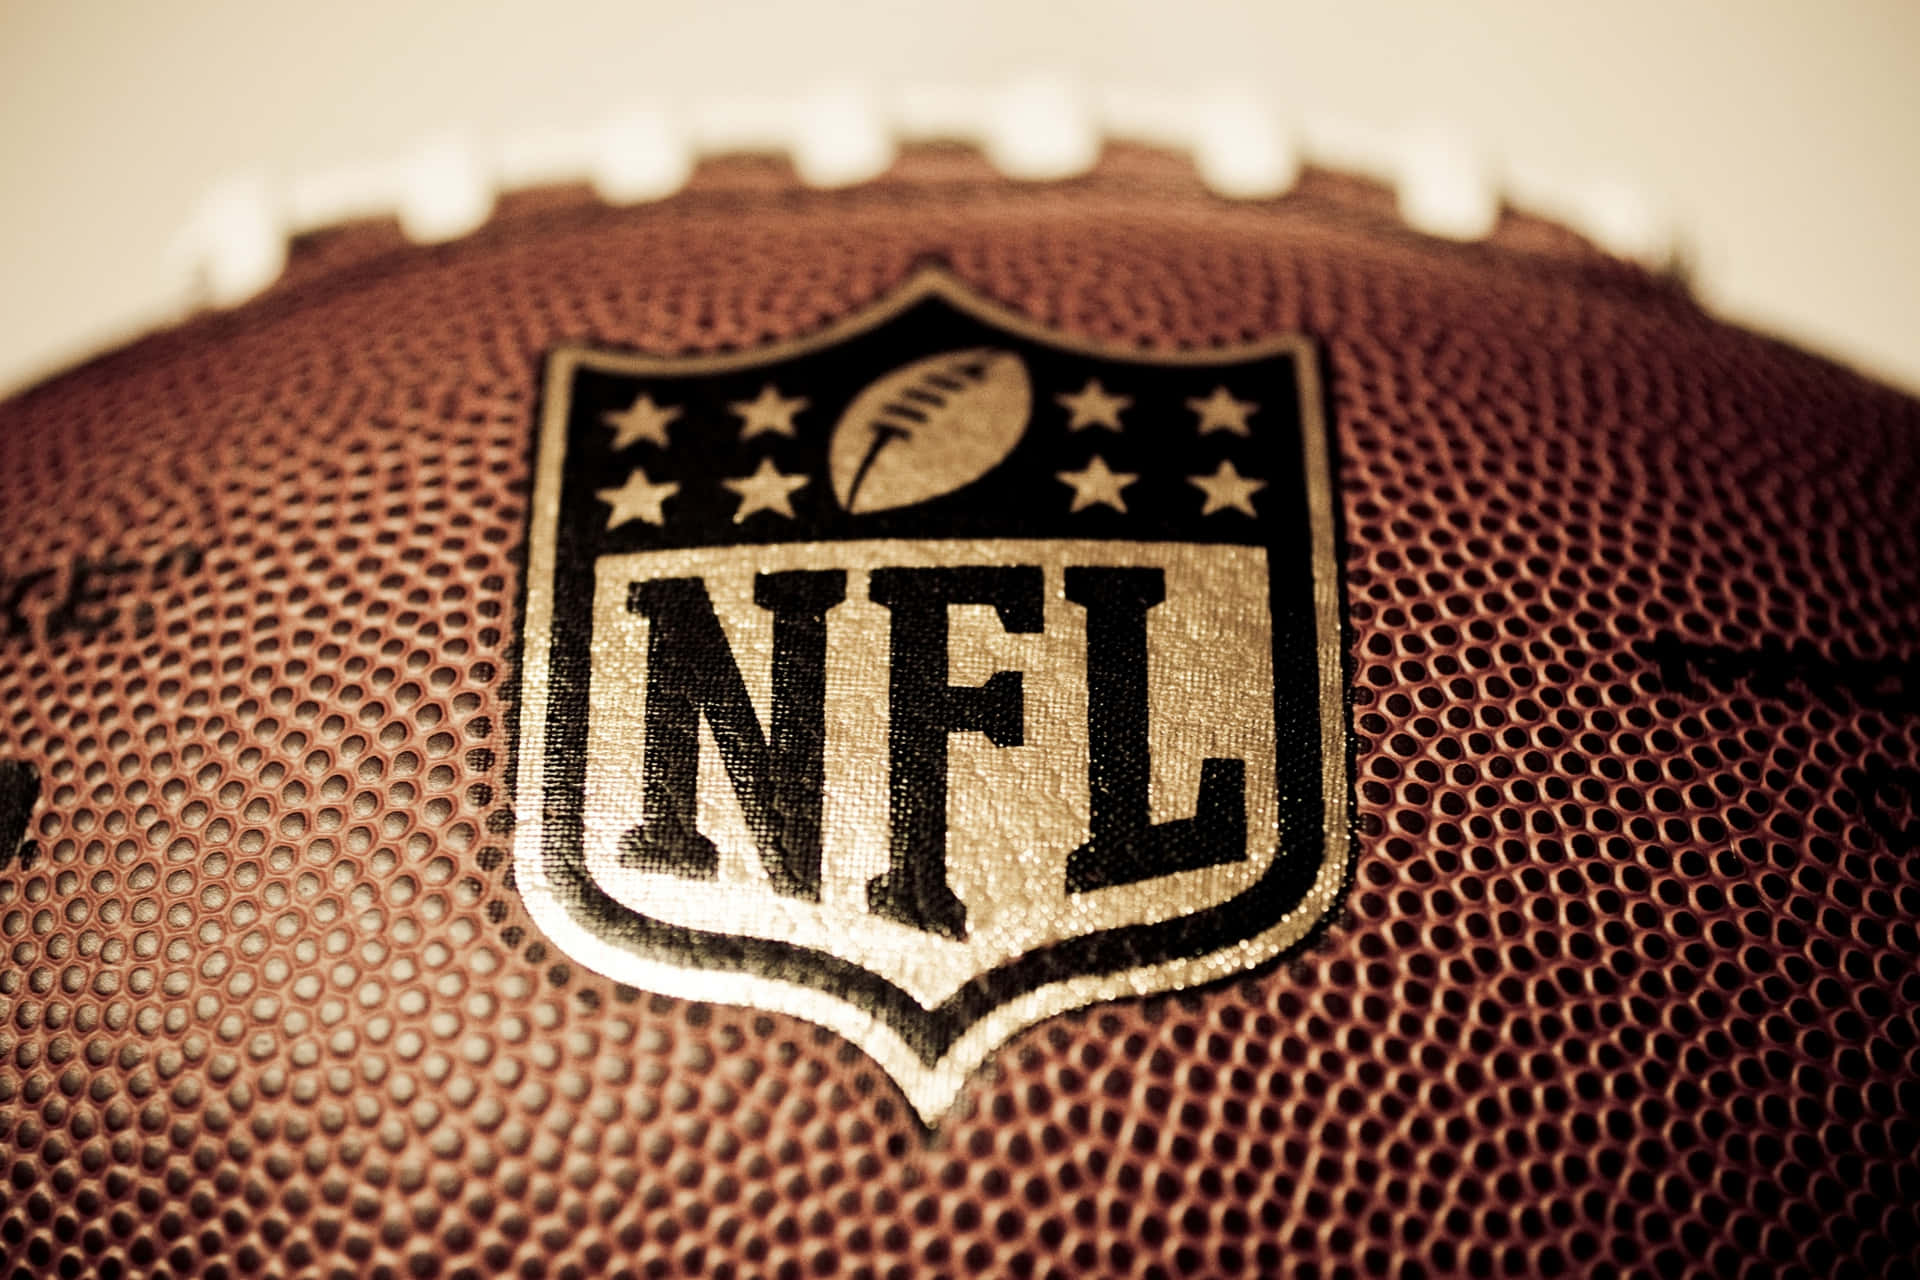 Touchdown! Football Season Is Here With Hd Nfl Background